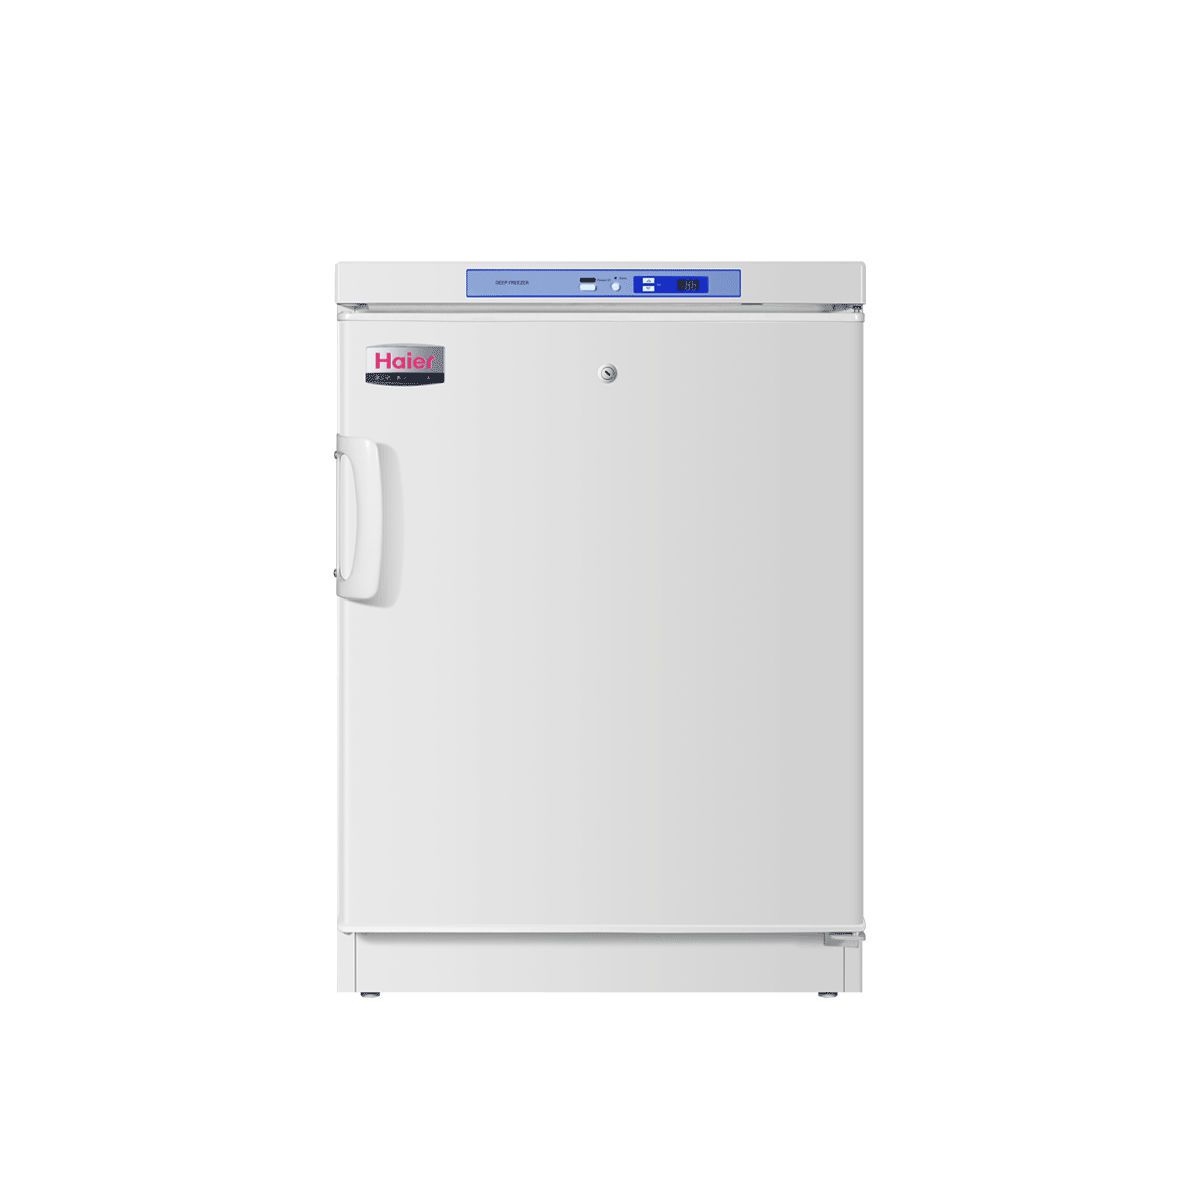 Laboratory freezer / cabinet / with manual defrost / 1-door -40 °C, 92 L | DW-40L92 Haier Medical and Laboratory Products